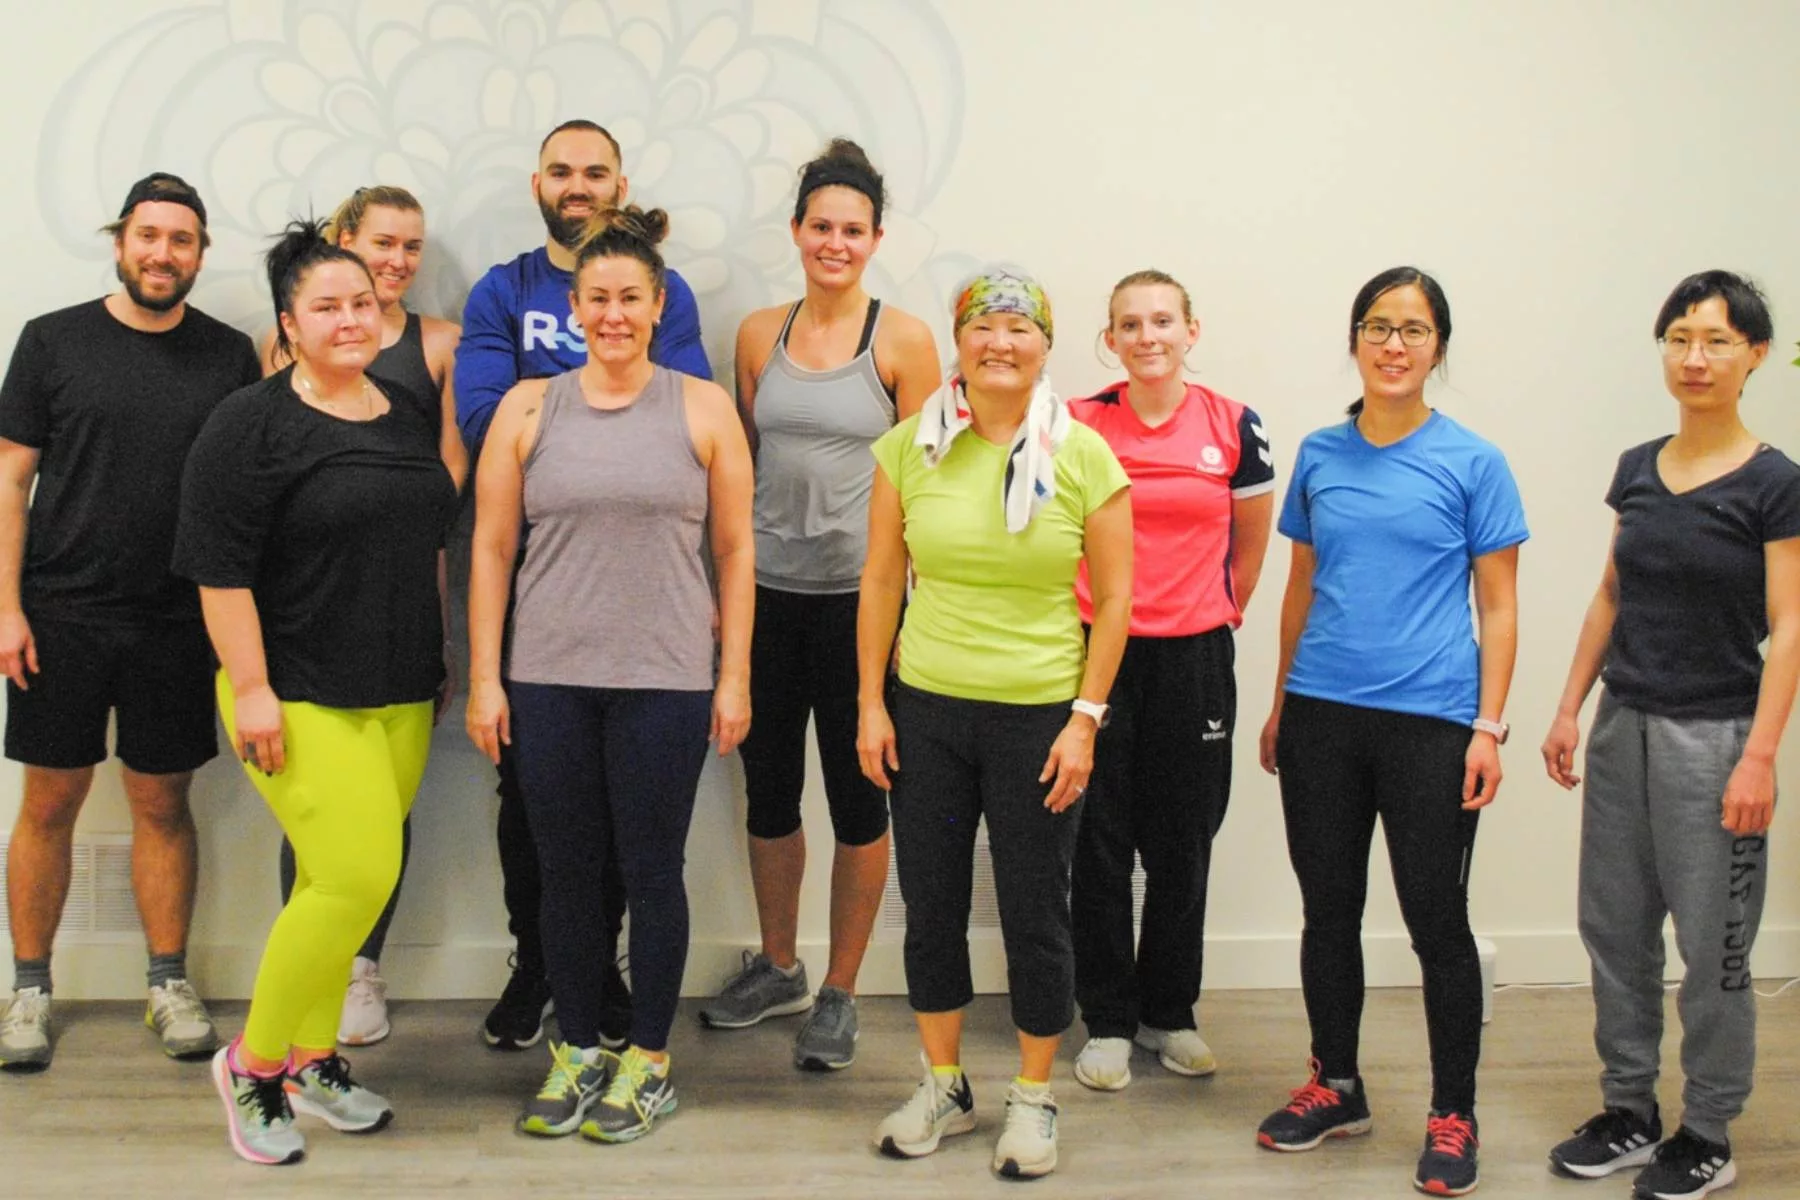 group fitness class participants smiling after workout